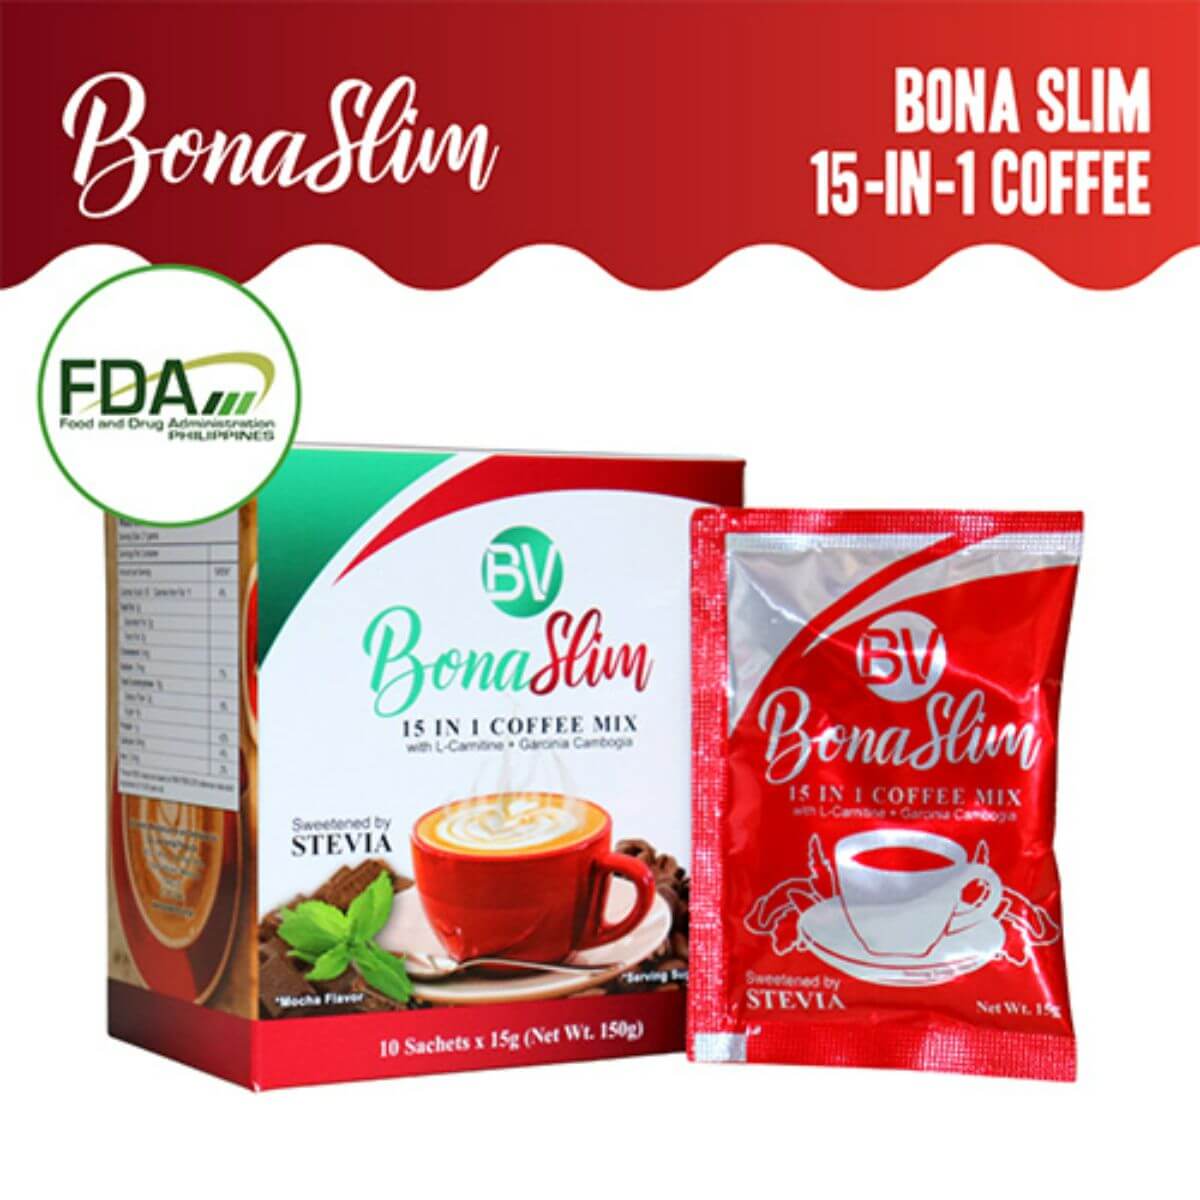 Start Your Weight Loss Journey with the Best Slimming Coffee in the Philippines – BonaSlim!